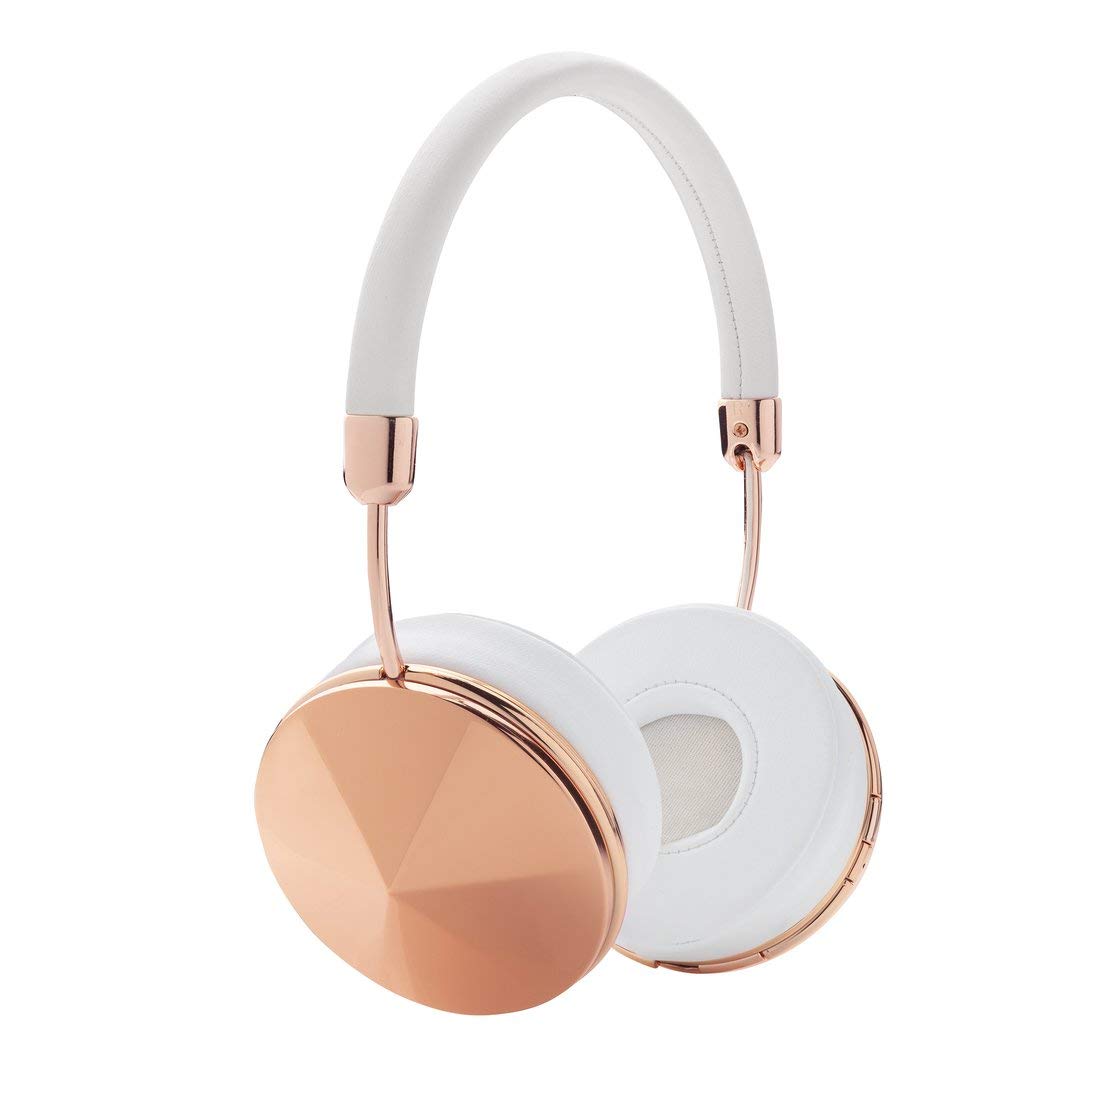 FRENDS Taylor Rose-Gold Wireless Headphones Over Ear, Women’s’ Fashion Headphones, Hi-Fi Sound, Bluetooth V5.0, 12 Hours Playtime, White Leather He...